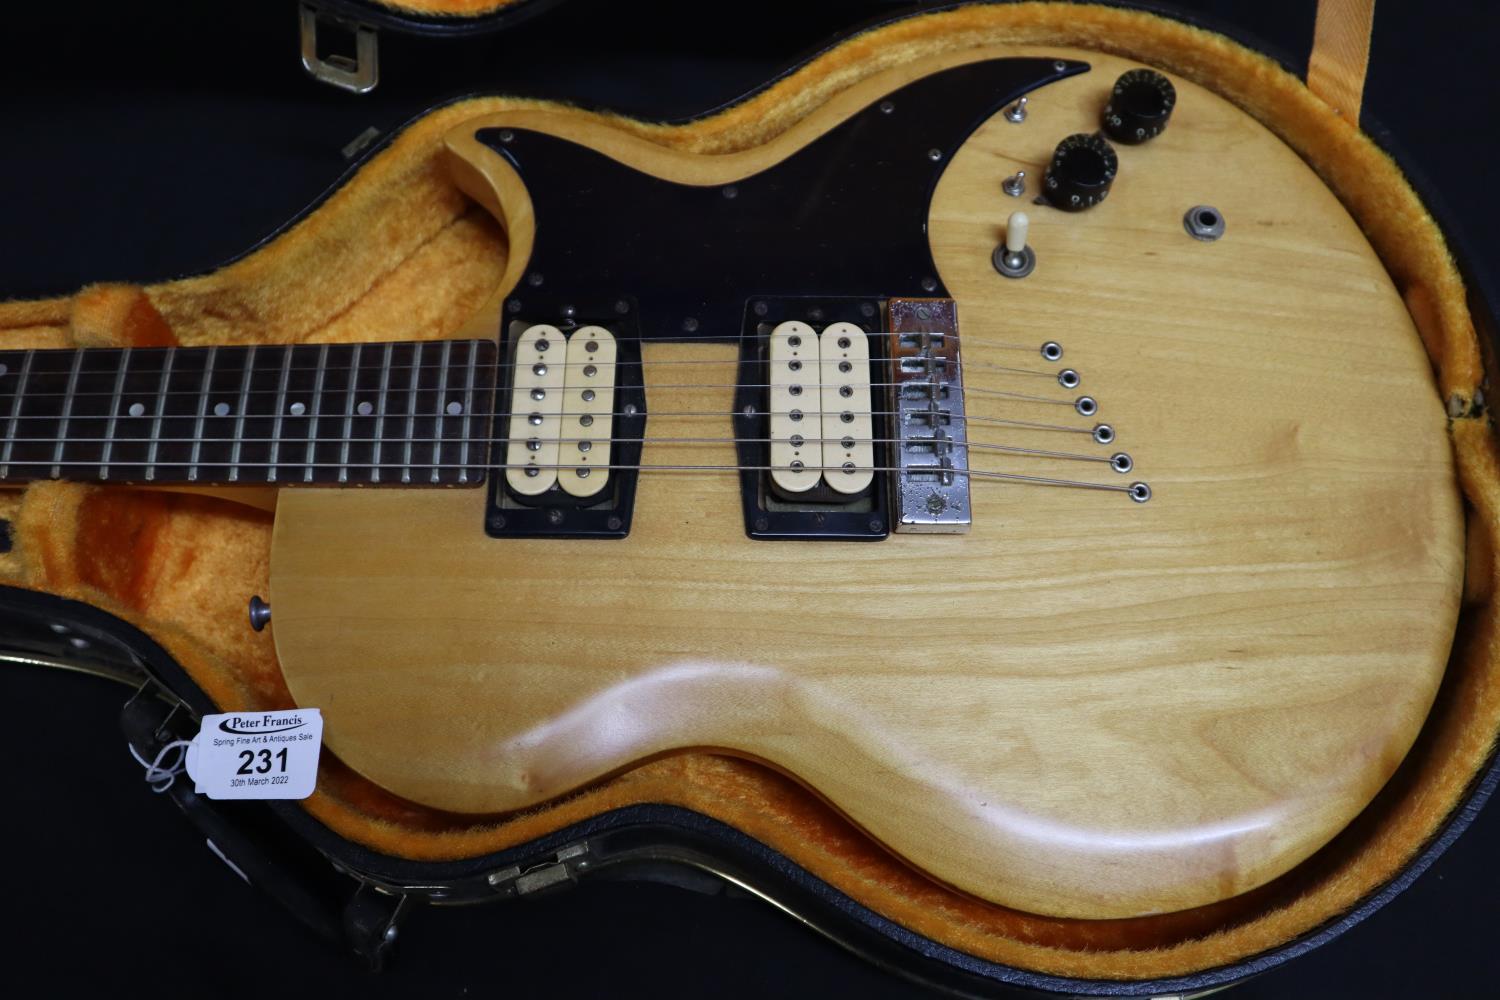 Vintage Gibson 501700 six string electric guitar with four pickups in natural wood finish and - Image 2 of 4